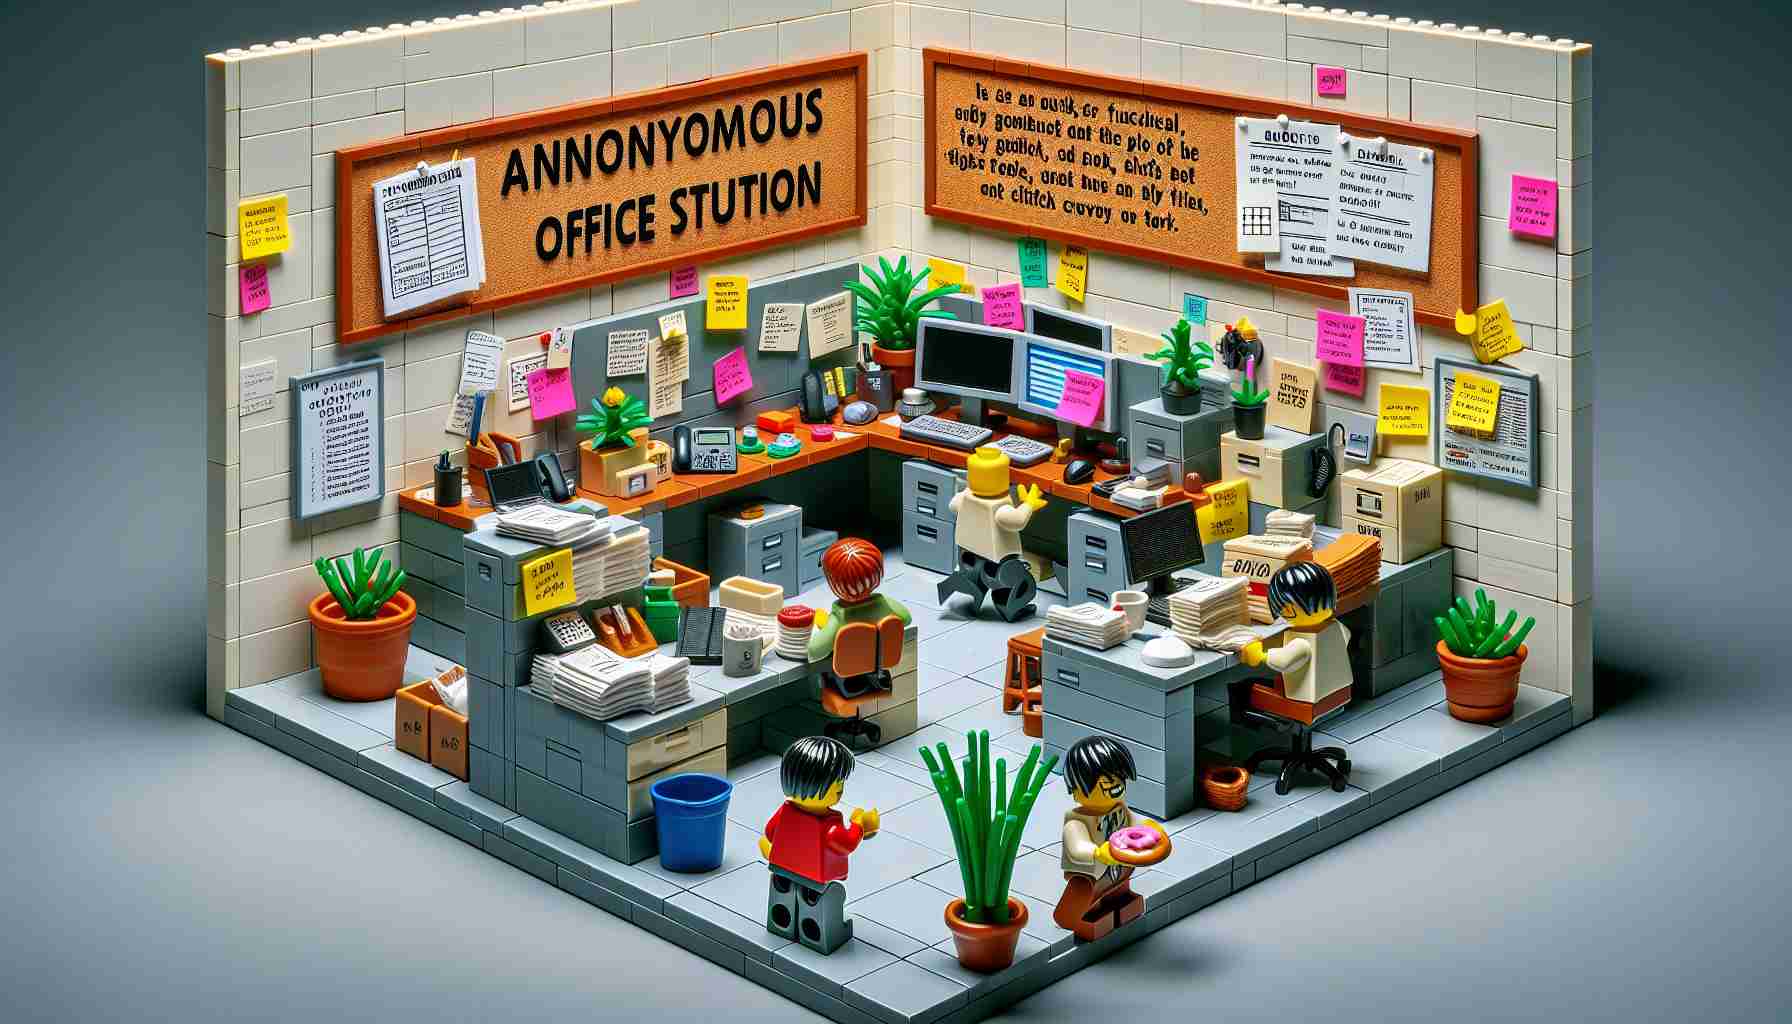 The Office' Dunder Mifflin Construction Set Is Your Own Personal